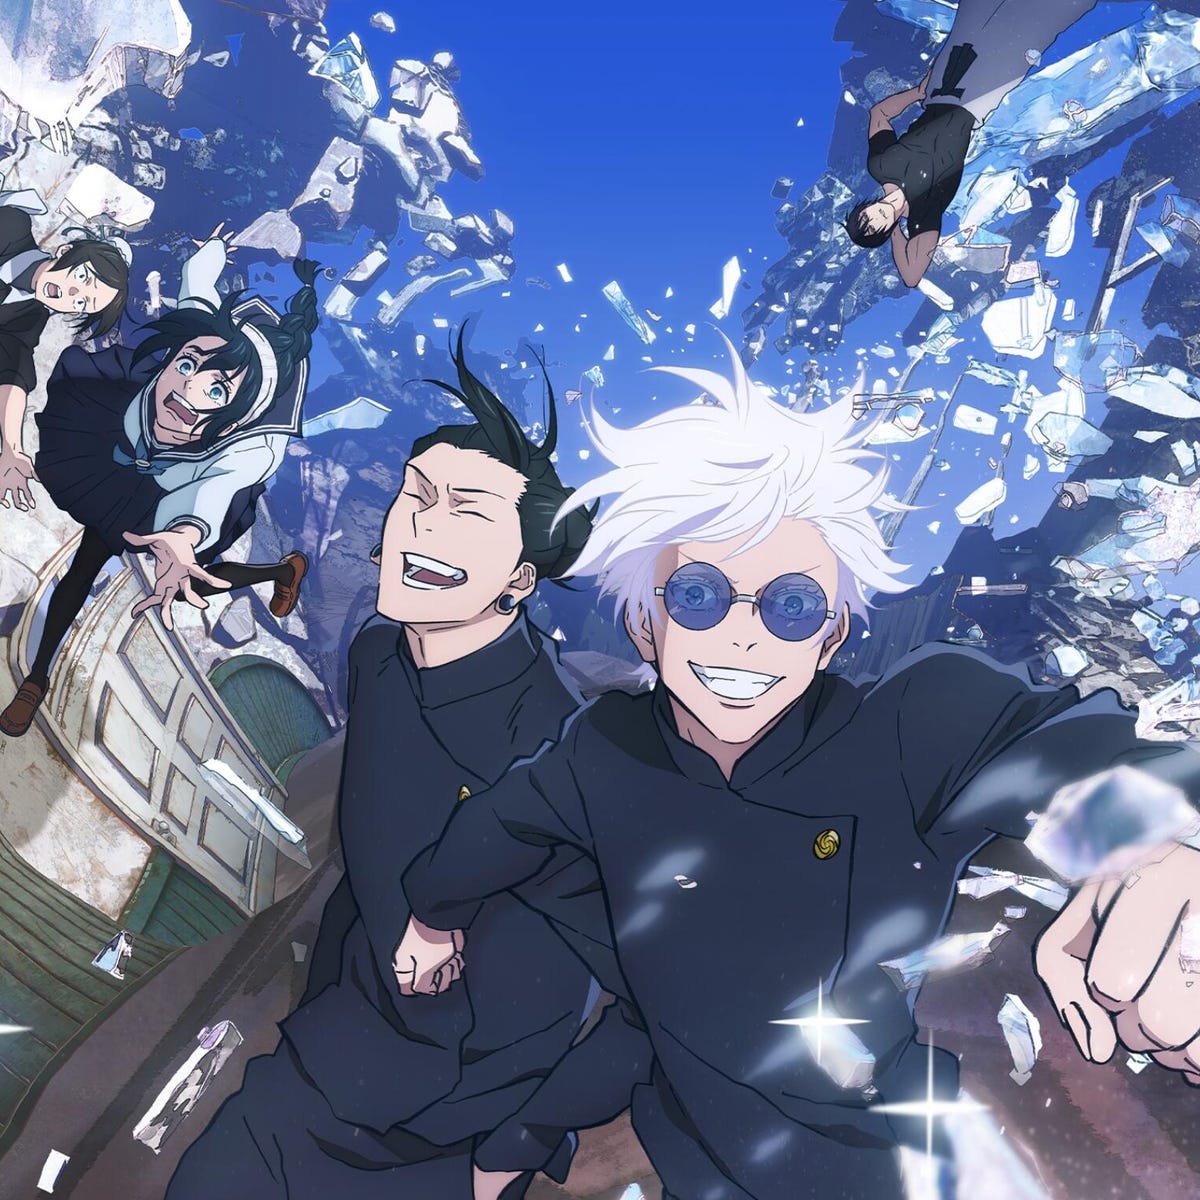 Best Anime Streaming Services of 2023 - CNET